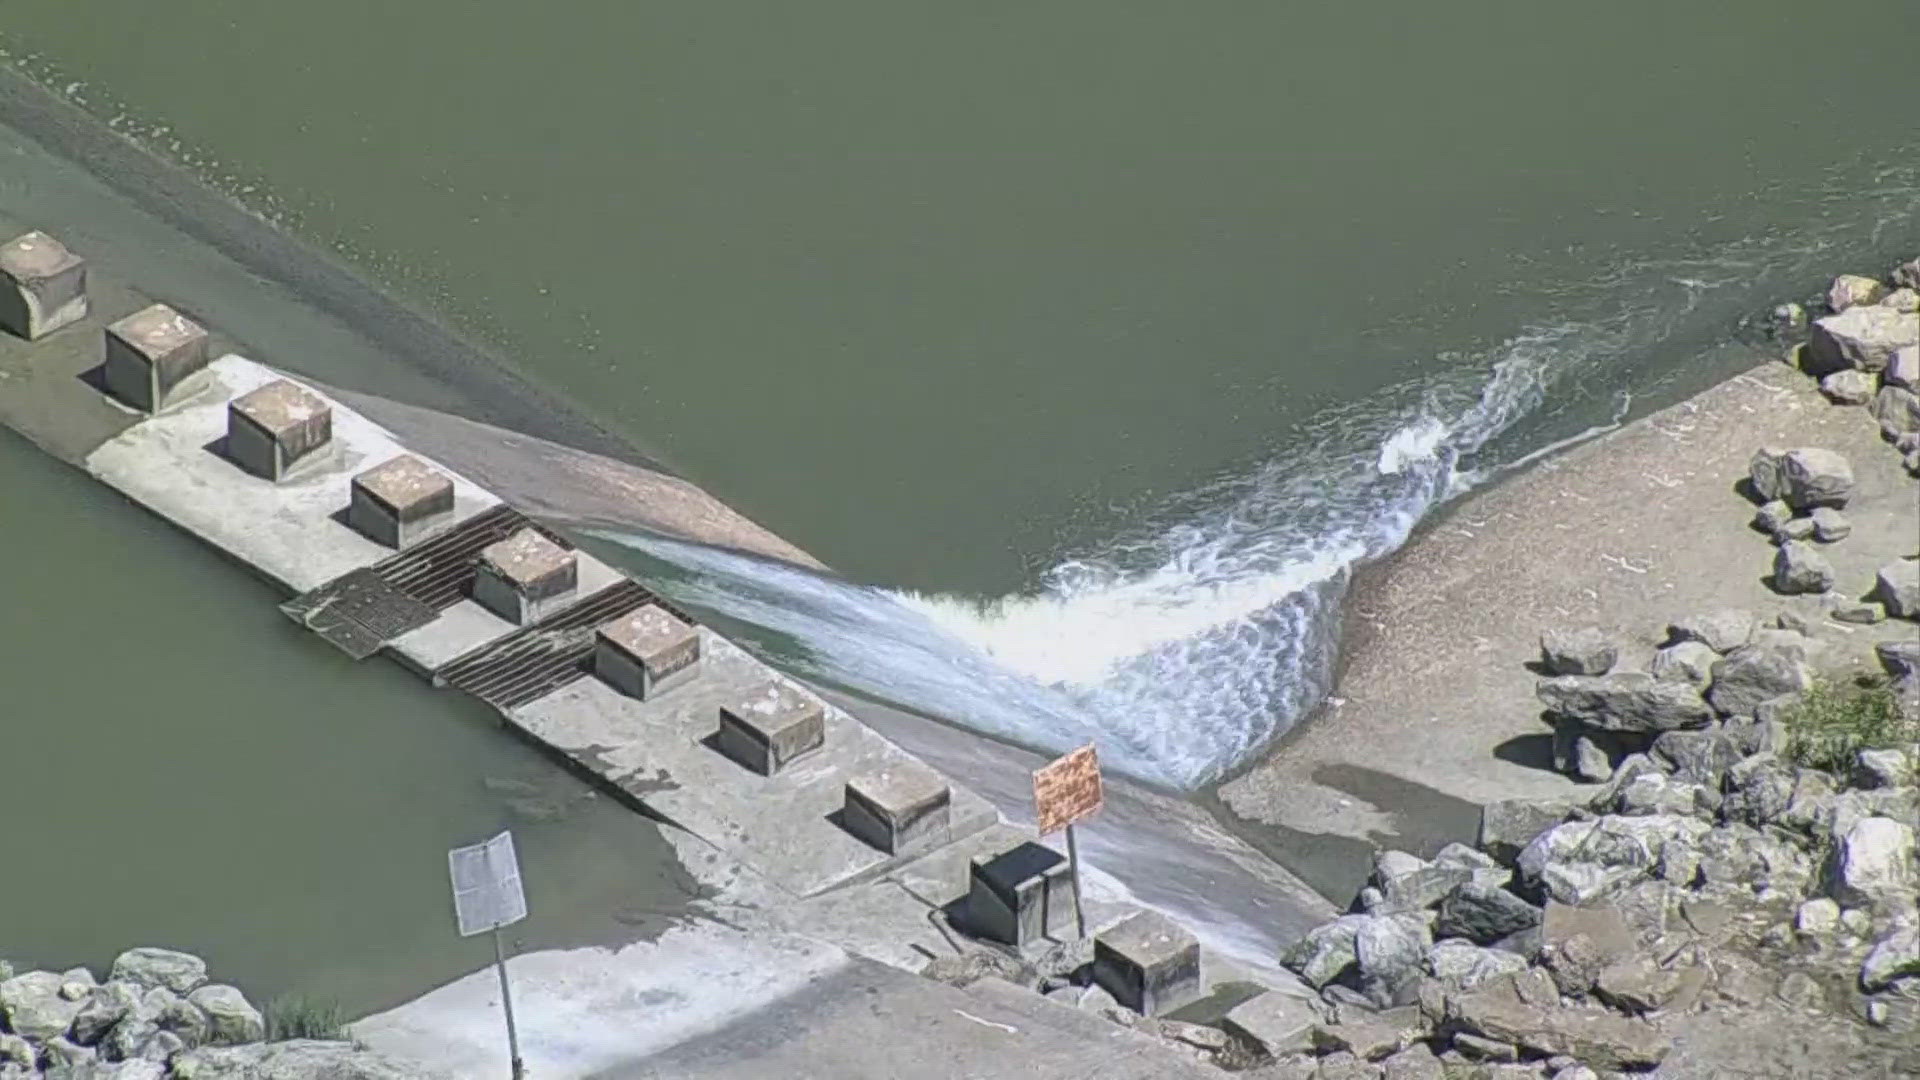 Officials say the man and his father were fishing near the spillway when he was pulled underwater.